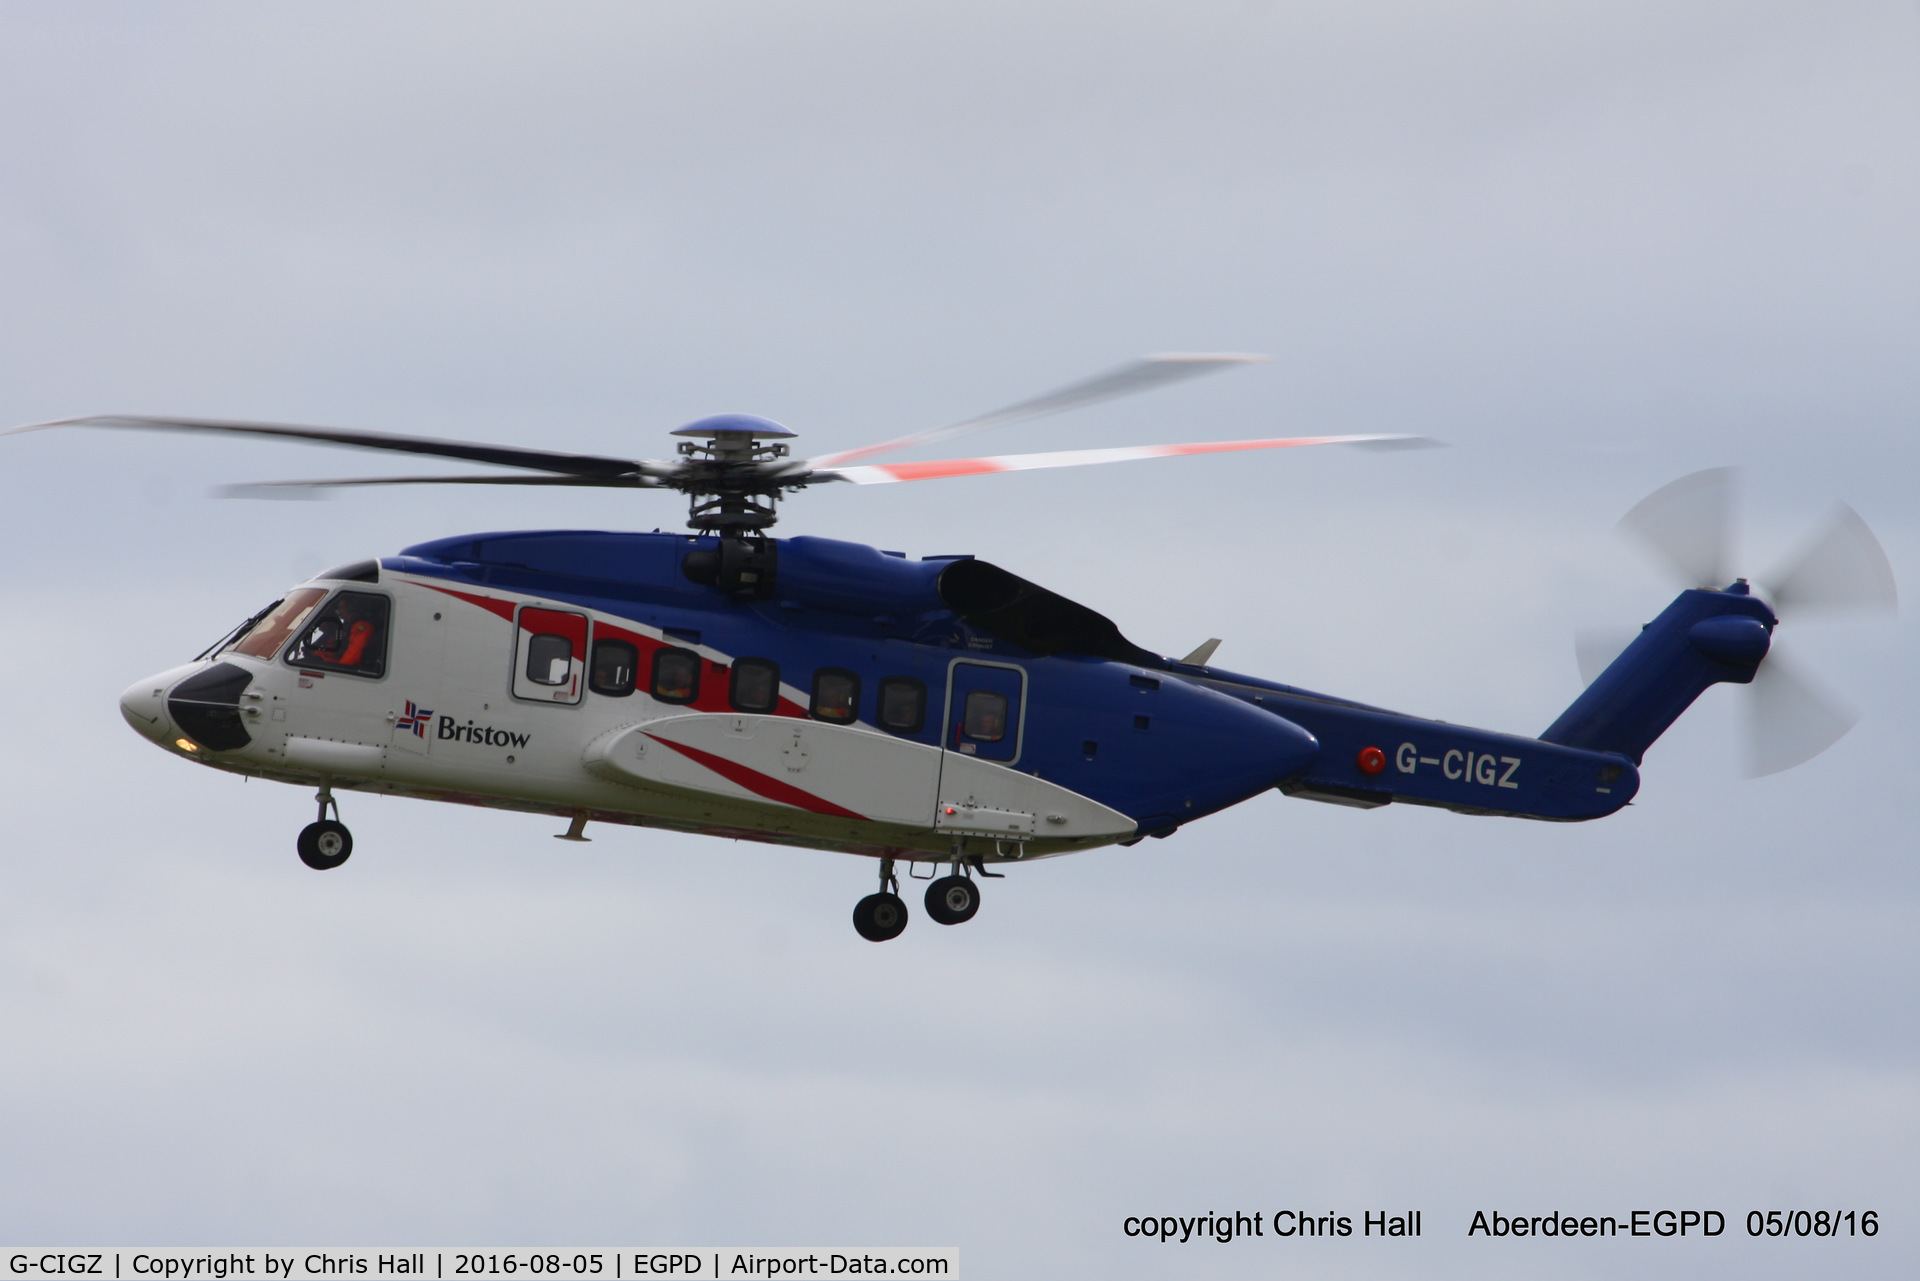 G-CIGZ, 2013 Sikorsky S-92A C/N 920224, Bristow Helicopters